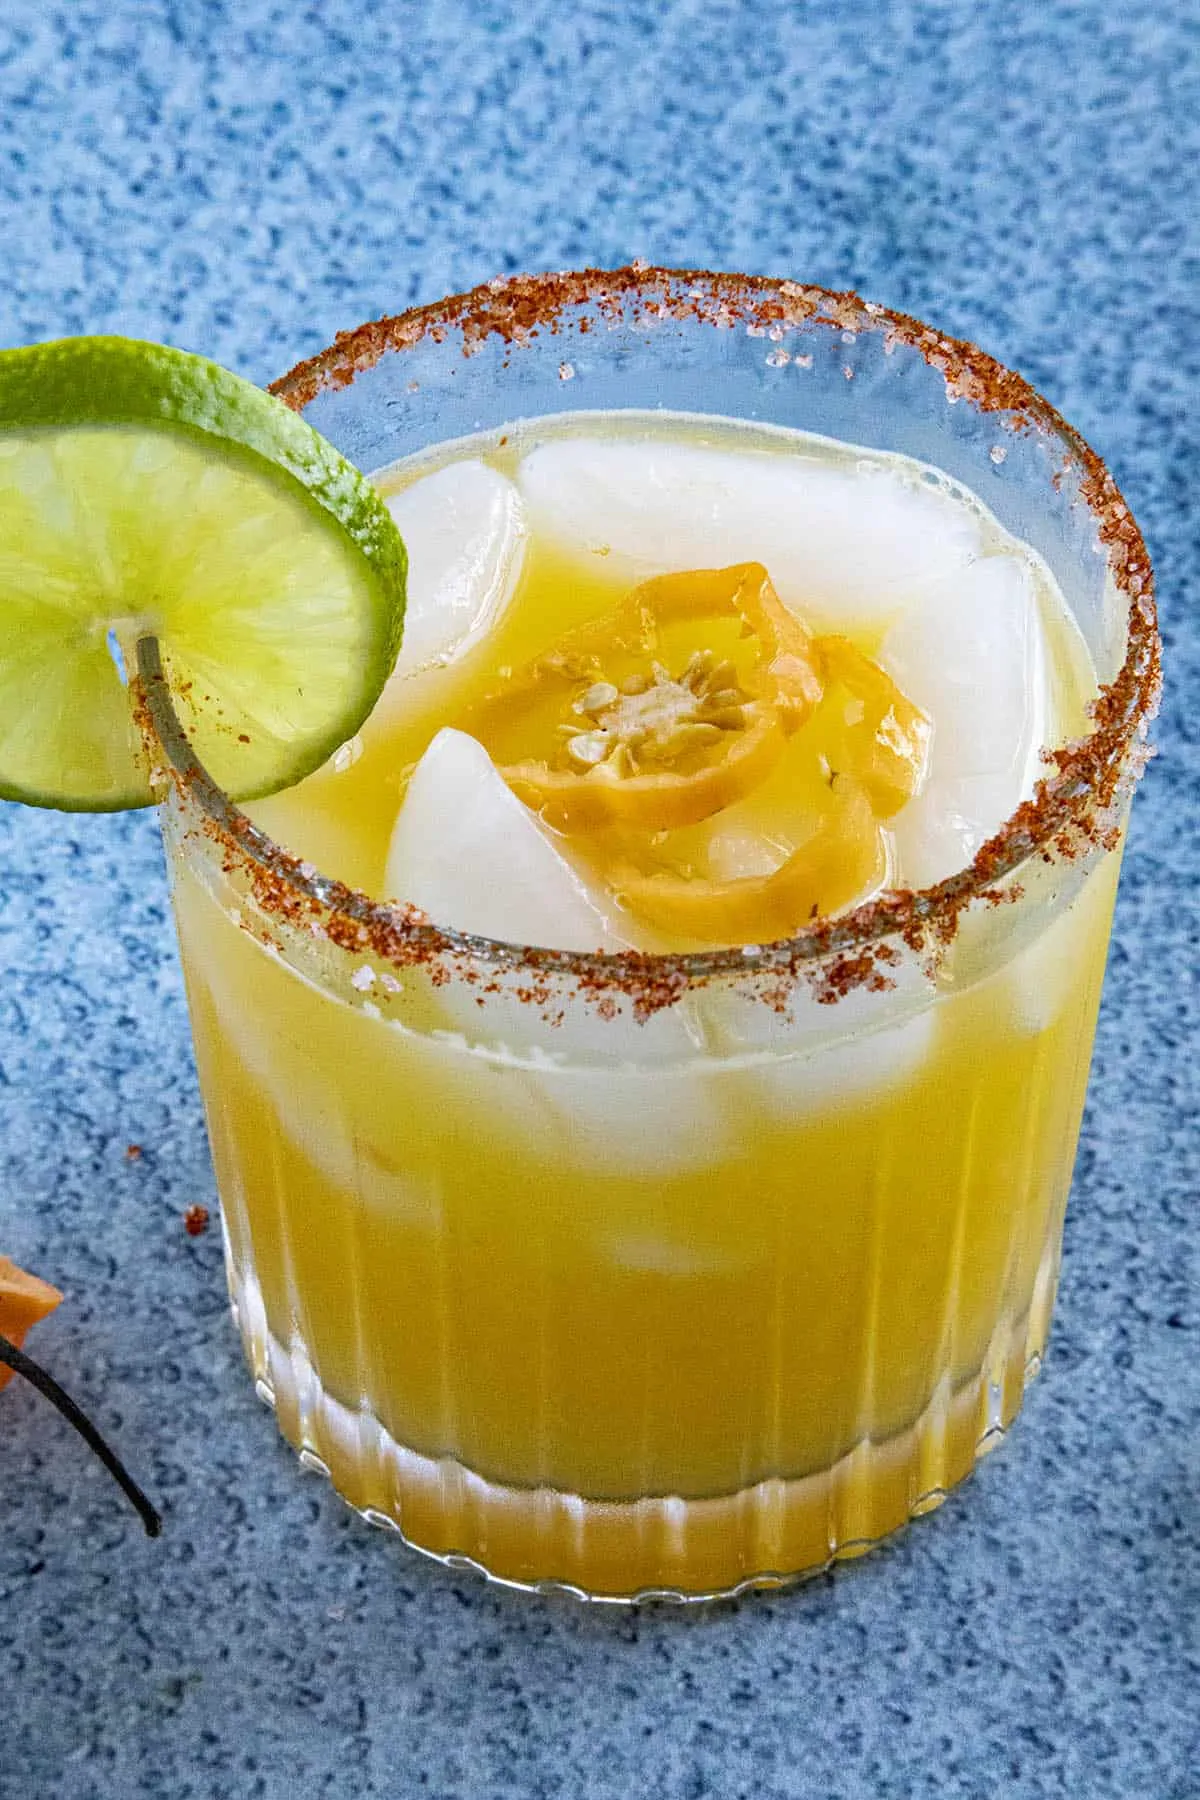 A glass full of the Spicy Mango Margarita